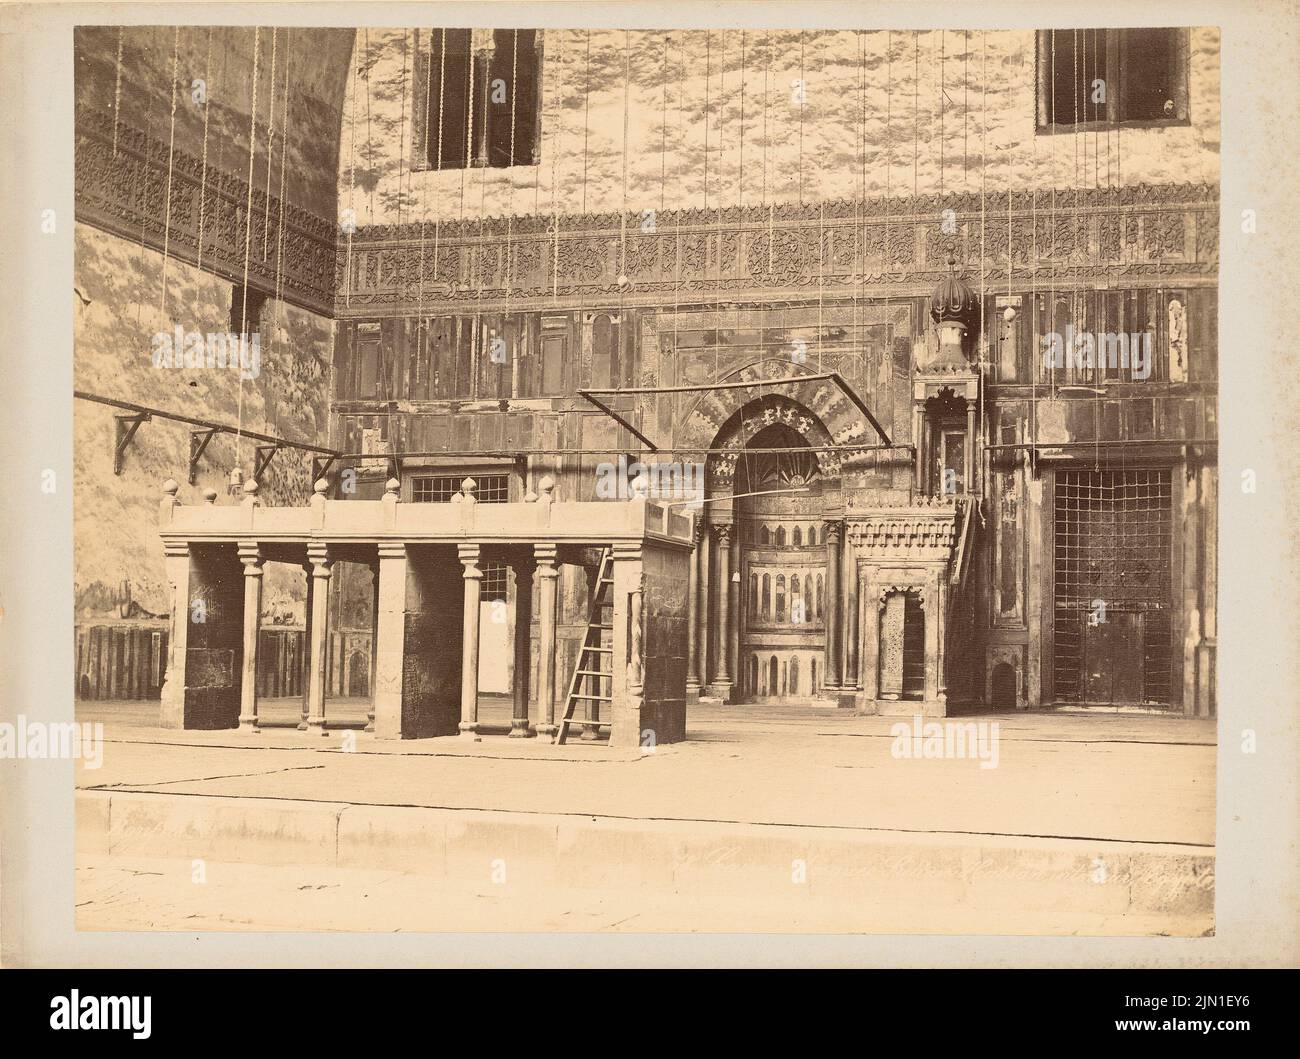 Bonfils Félix (1831-1885), Sultan Hassan Mosque in Cairo (without dat.): Interior. Photo on cardboard, 24 x 32.1 cm (including scan edges) Bonfils Félix  (1831-1885): Sultan Hassan Moschee, Kairo Stock Photo